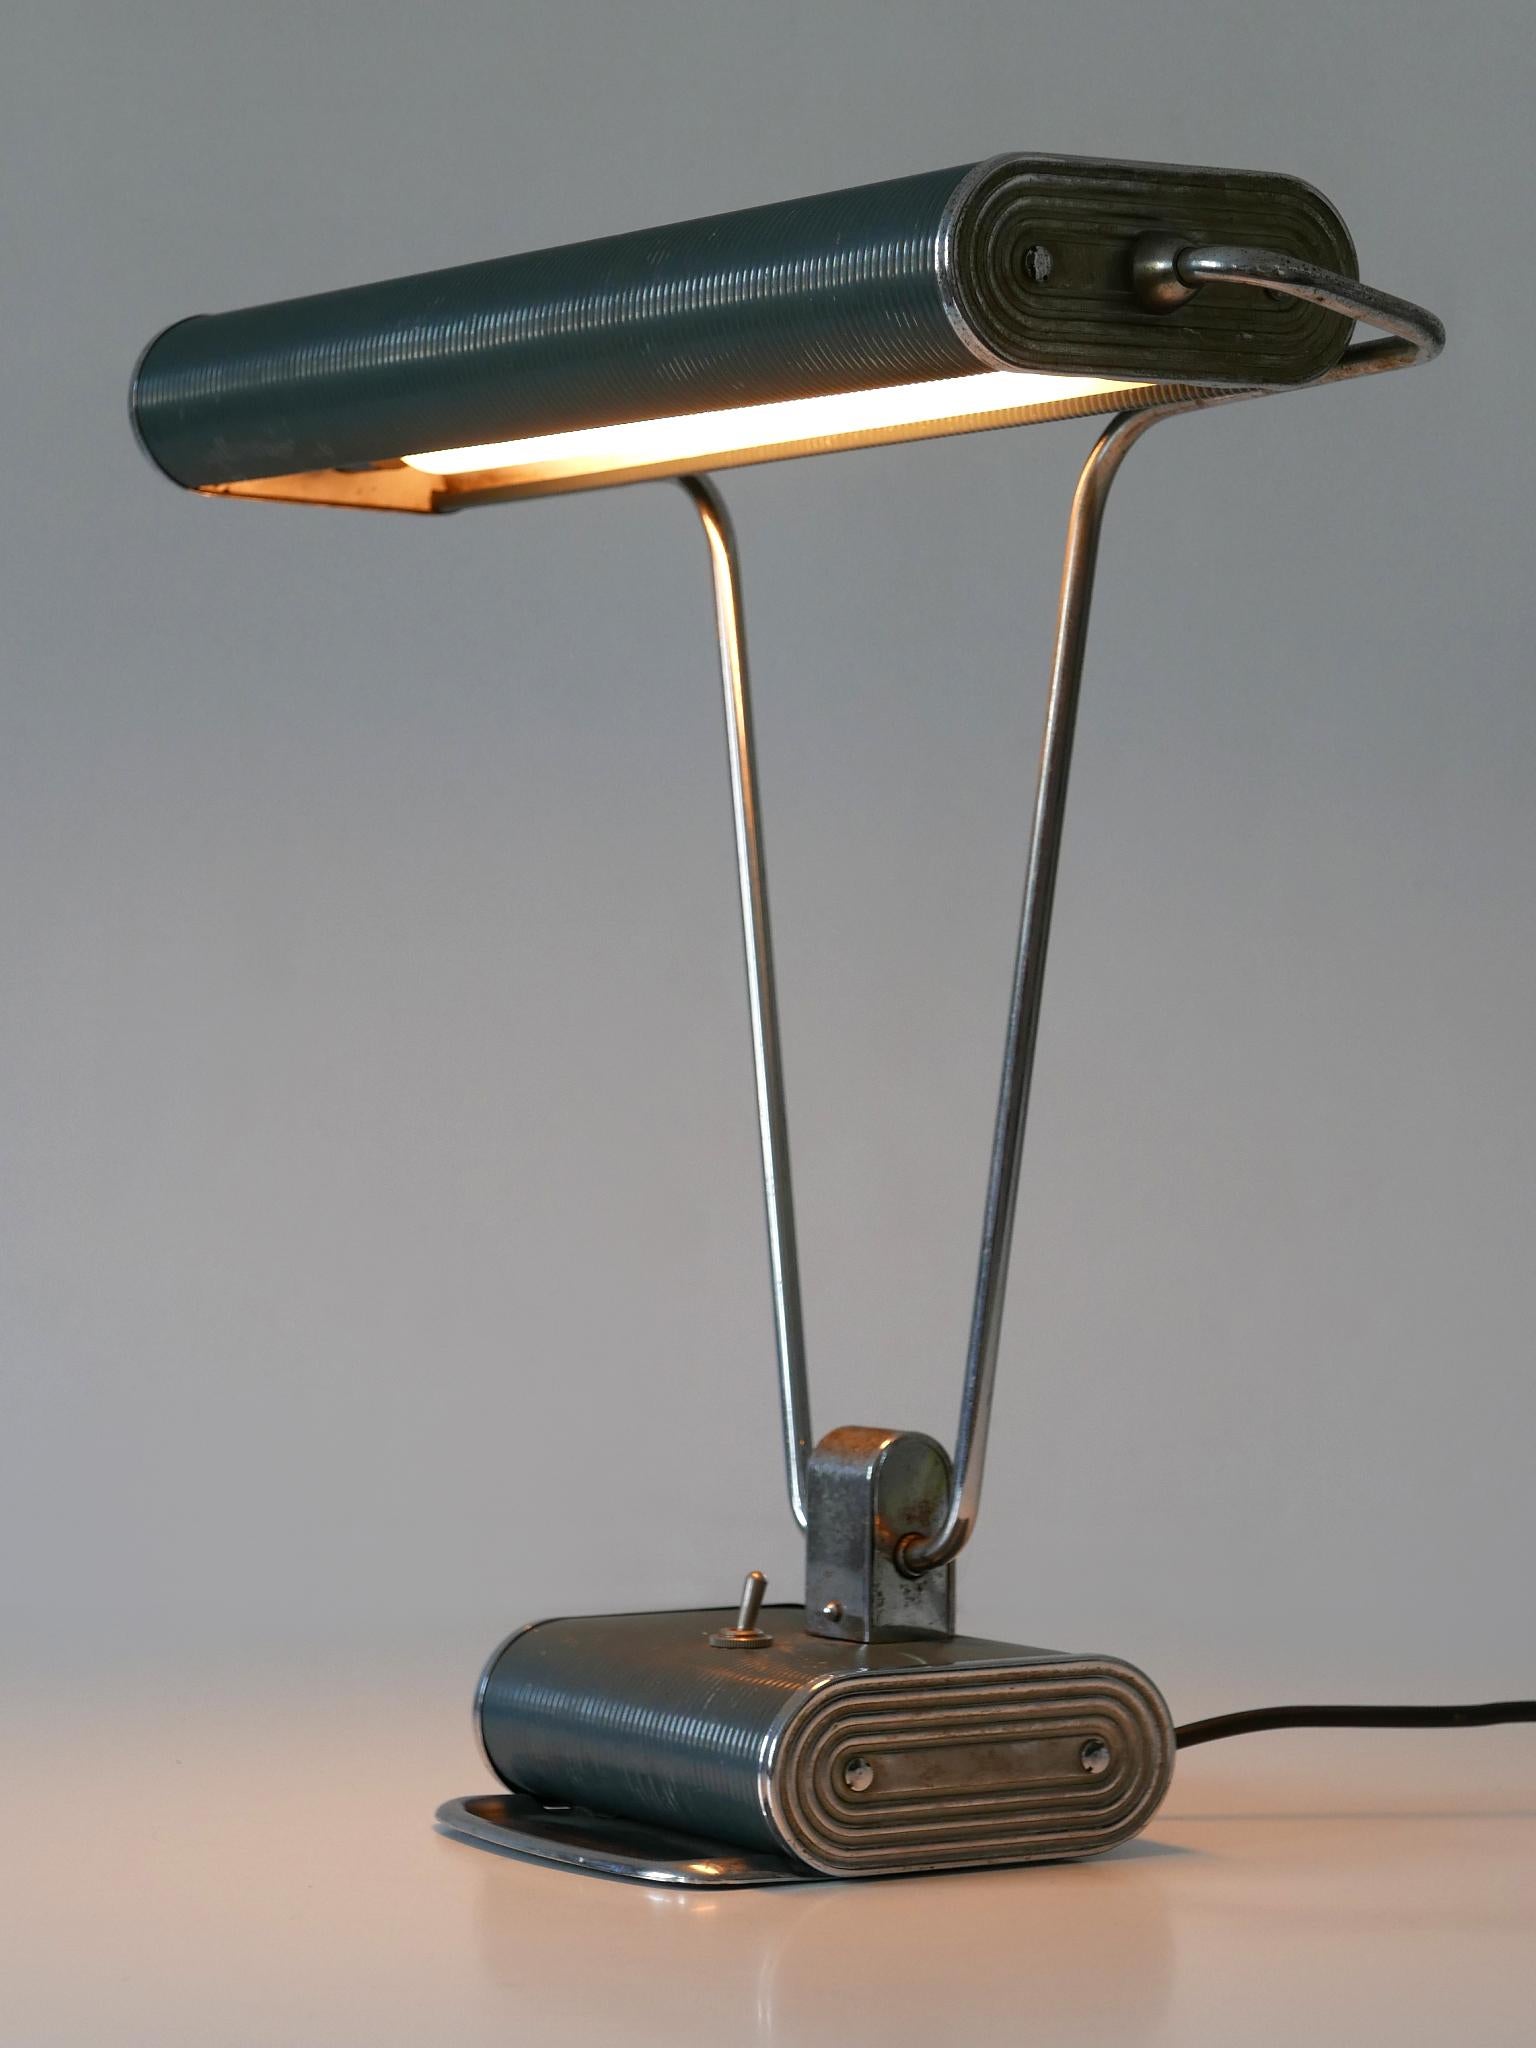 Elegant Art Deco table lamp or desk light 'No 71' in blue-gray and silver color. Lamp shade rotating. Designed by André Mounique for Jumo, France, 1930s.

A total of 5 lamps in two colors available!
This is the number 4 of the five desk lights. The